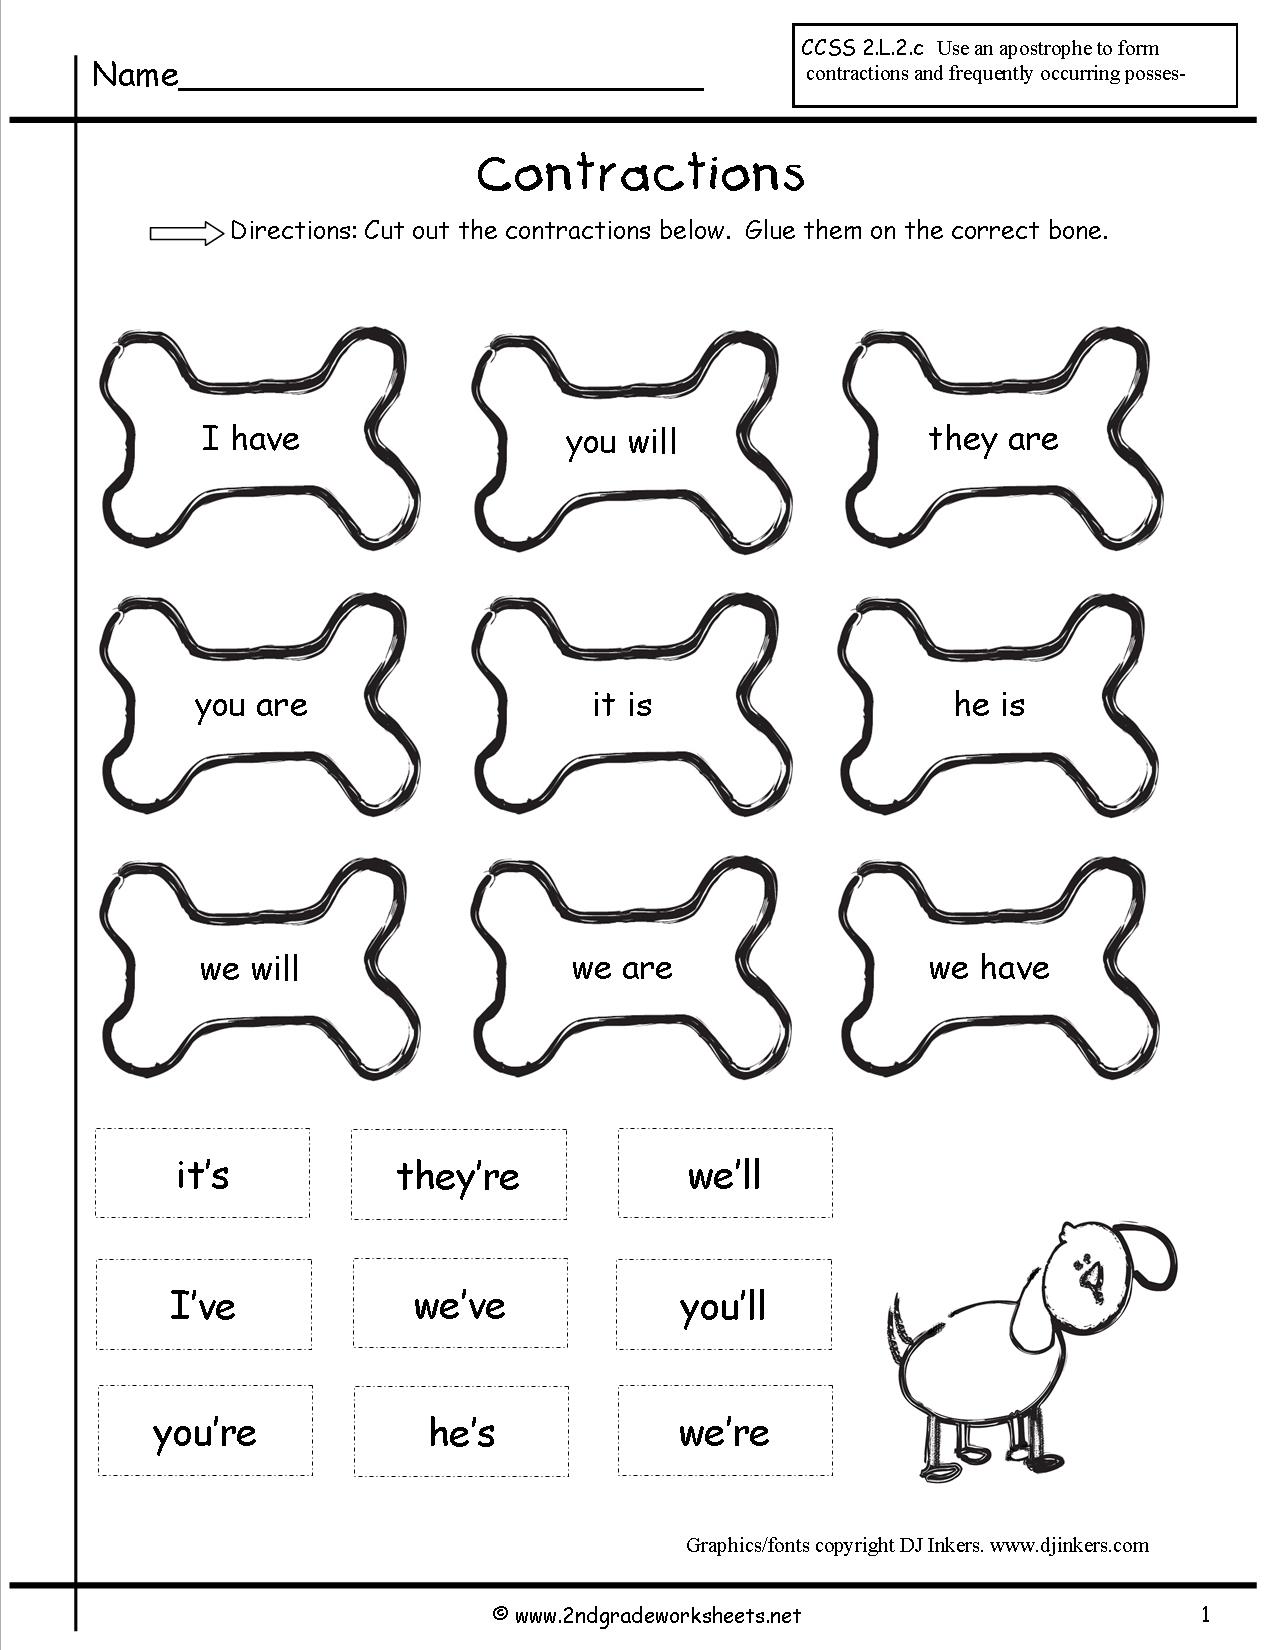 Free Contraction Worksheets 25802